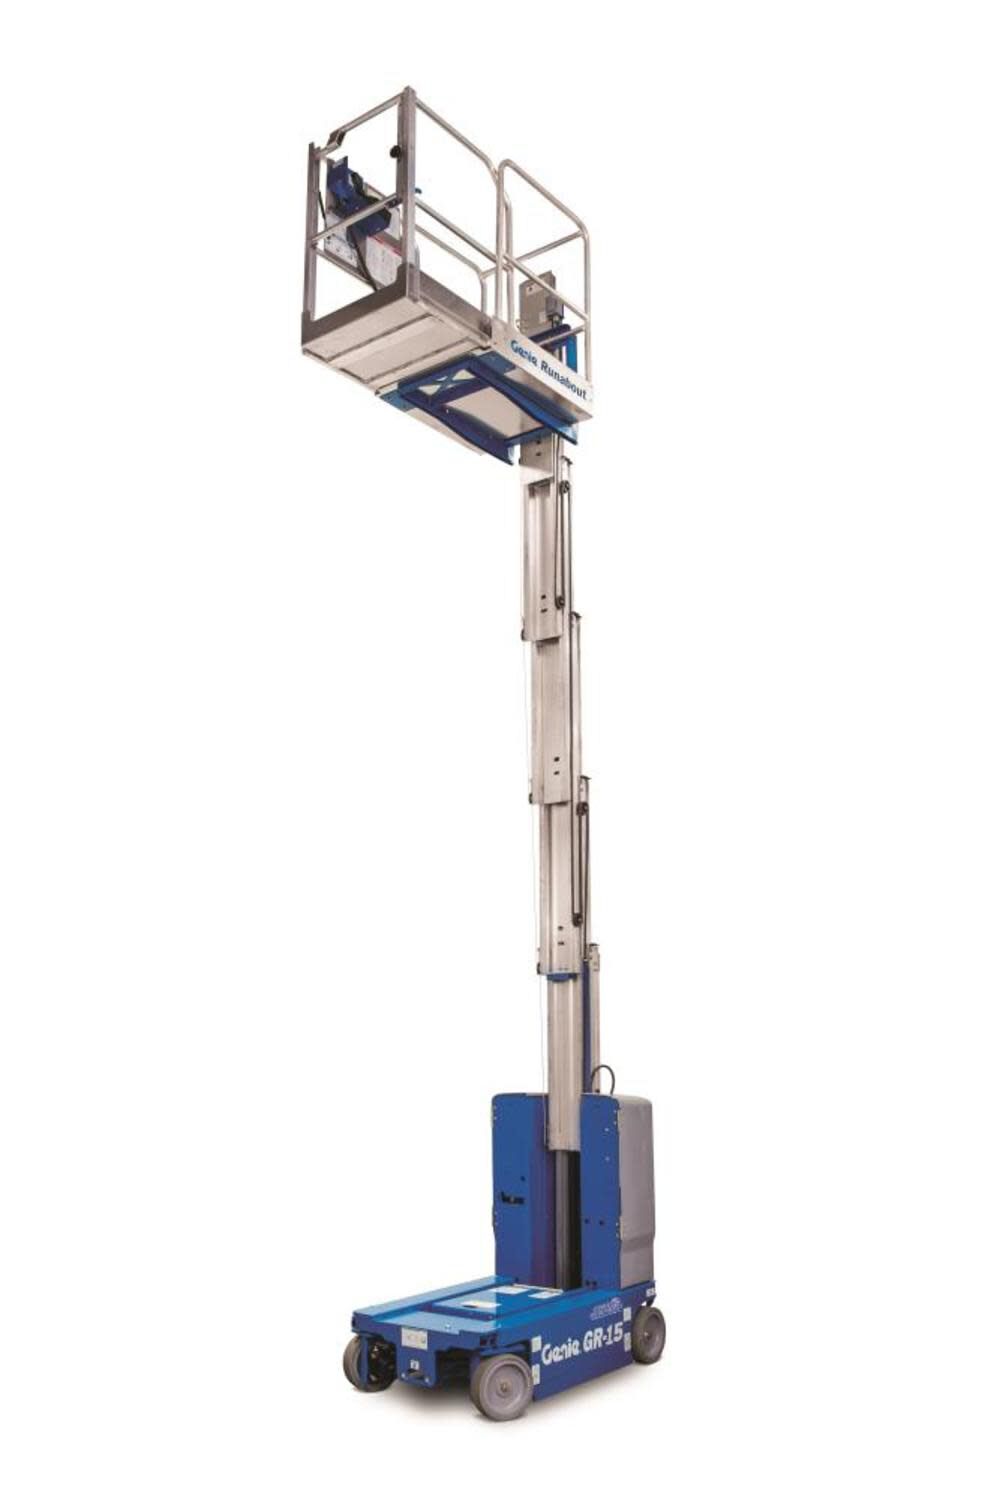 Runabout Vertical Mast Lift 15' Platform Height 500# Lift Capacity Electric GR-15